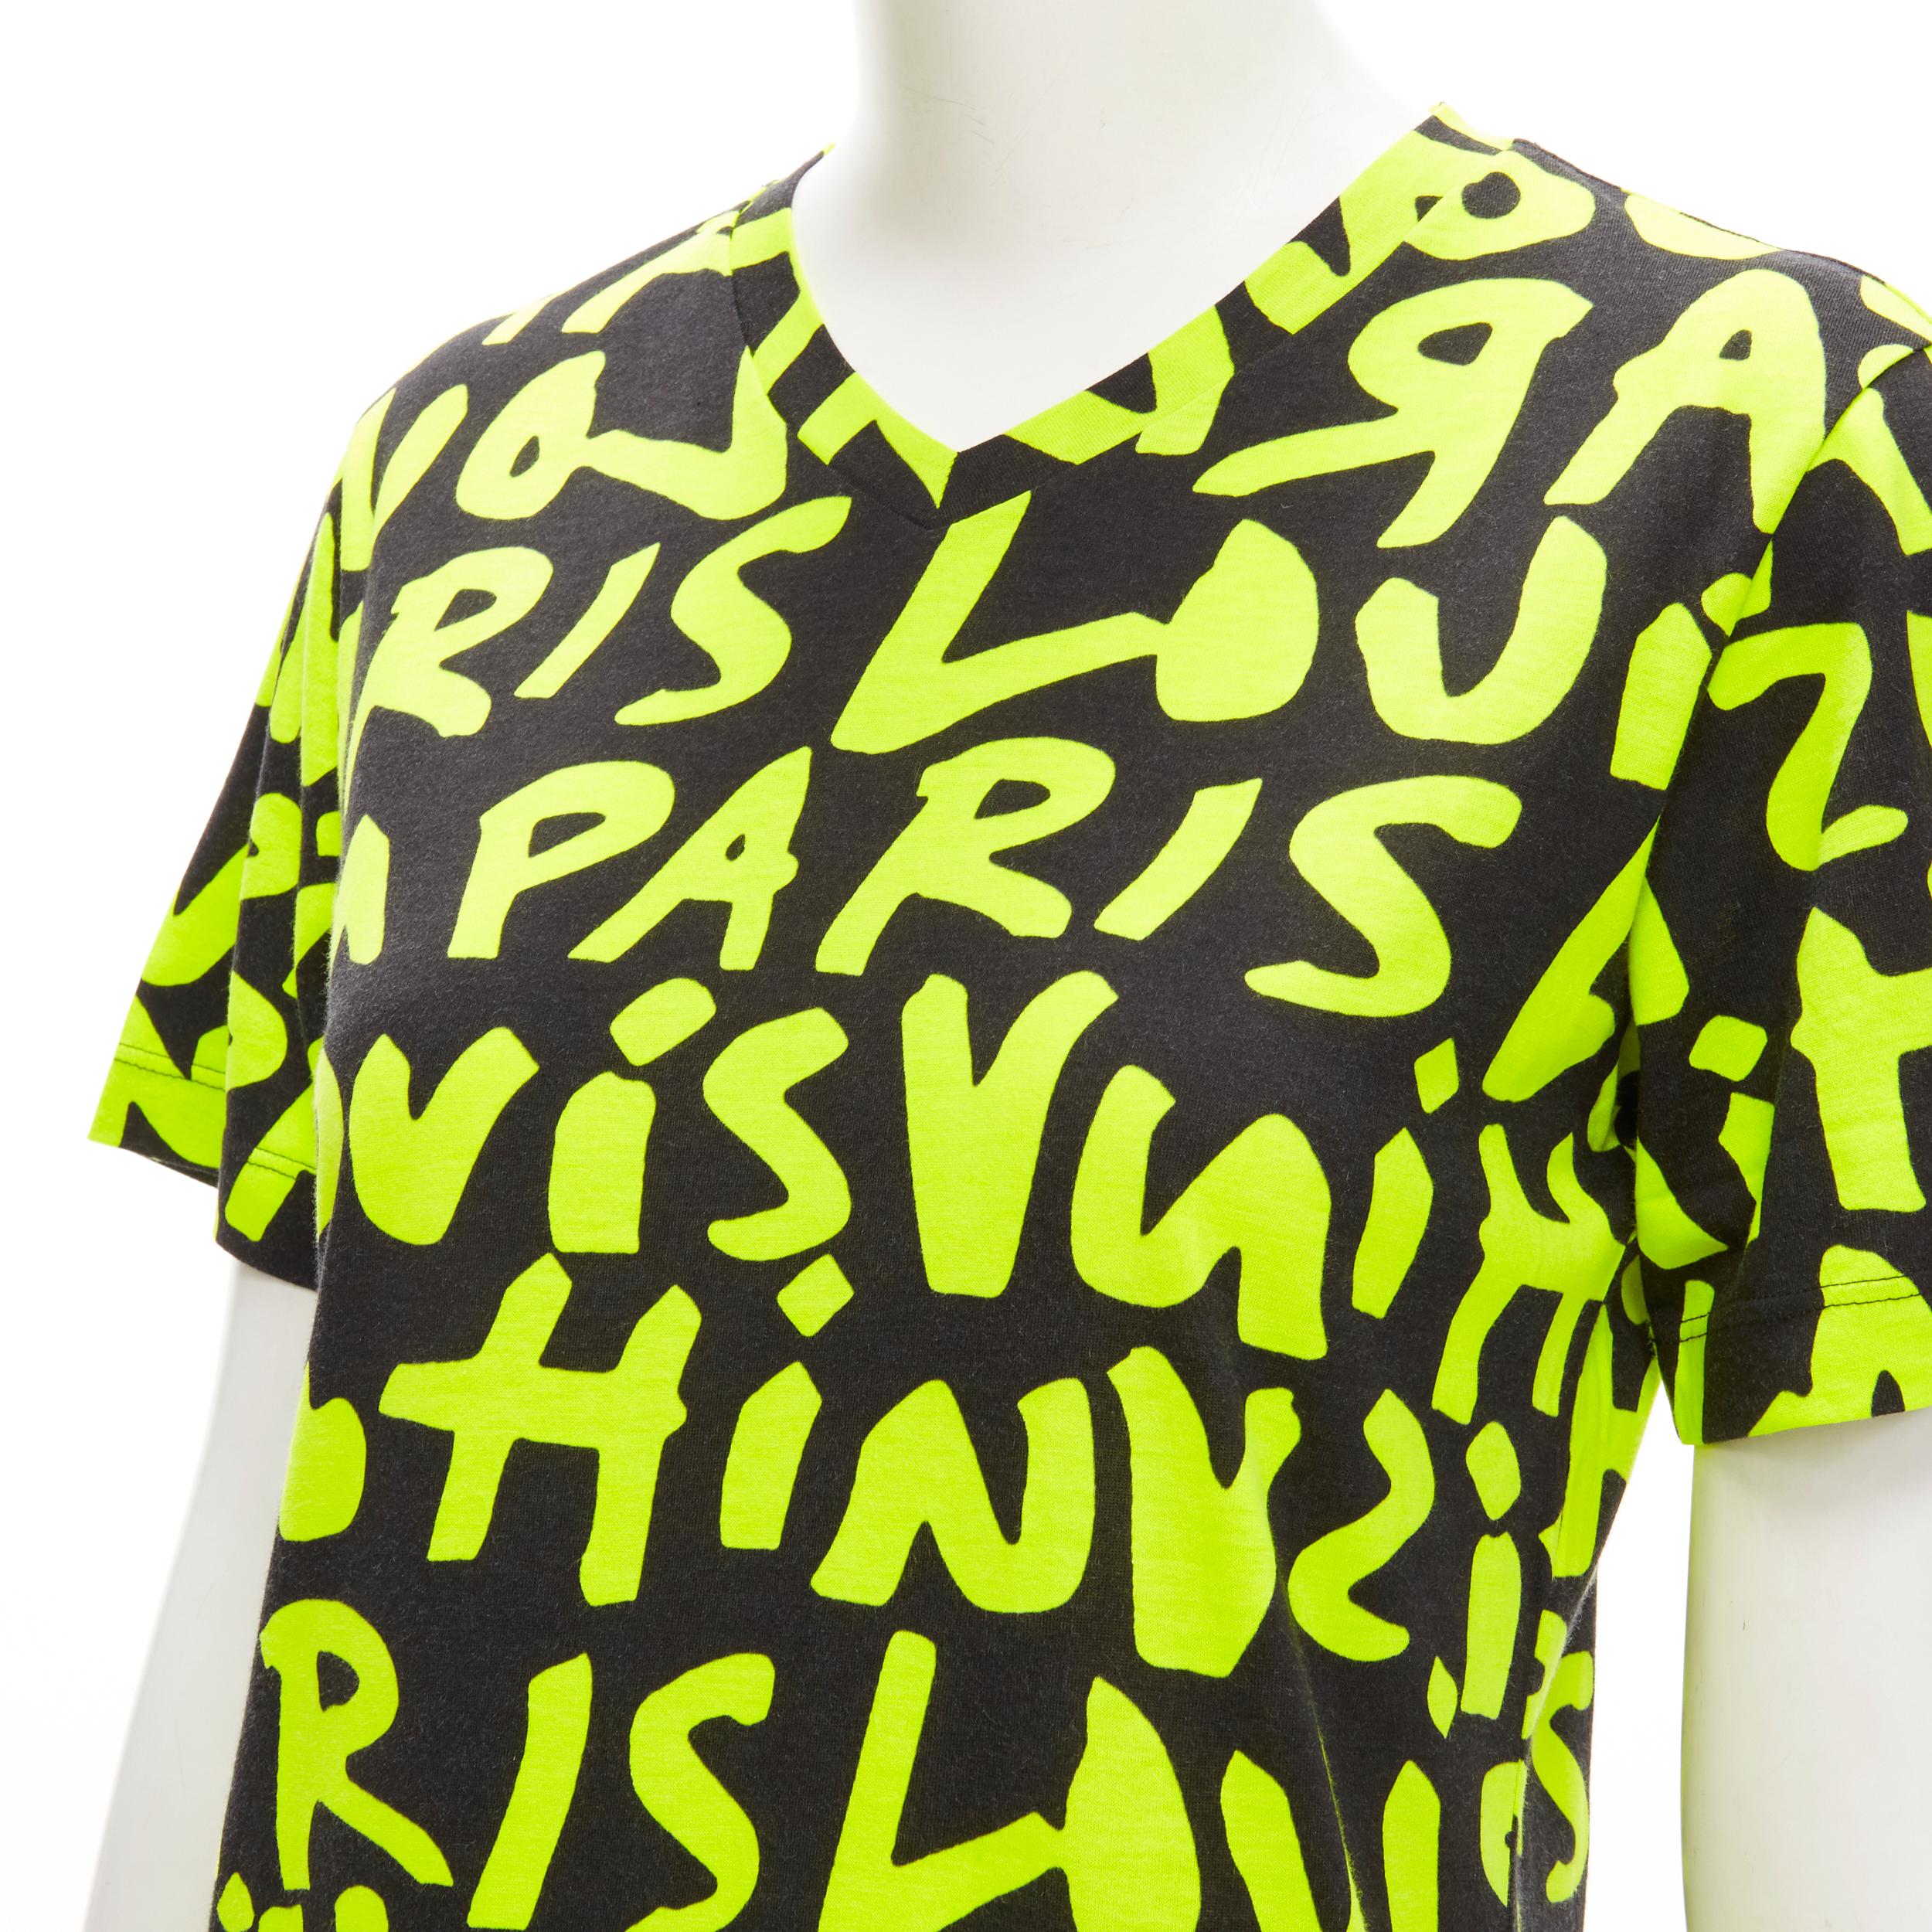 LOUIS VUITTON Stephen Sprouse Iconic Graffiti black neon yellow tshirt 
Reference: ANWU/A00638 
Brand: Louis Vuitton 
Designer: Marc Jacobs 
Collection: Stephen Sprouse Graffiti 
Material: Feels like cotton 
Color: Black 
Pattern: Graffiti 
Extra